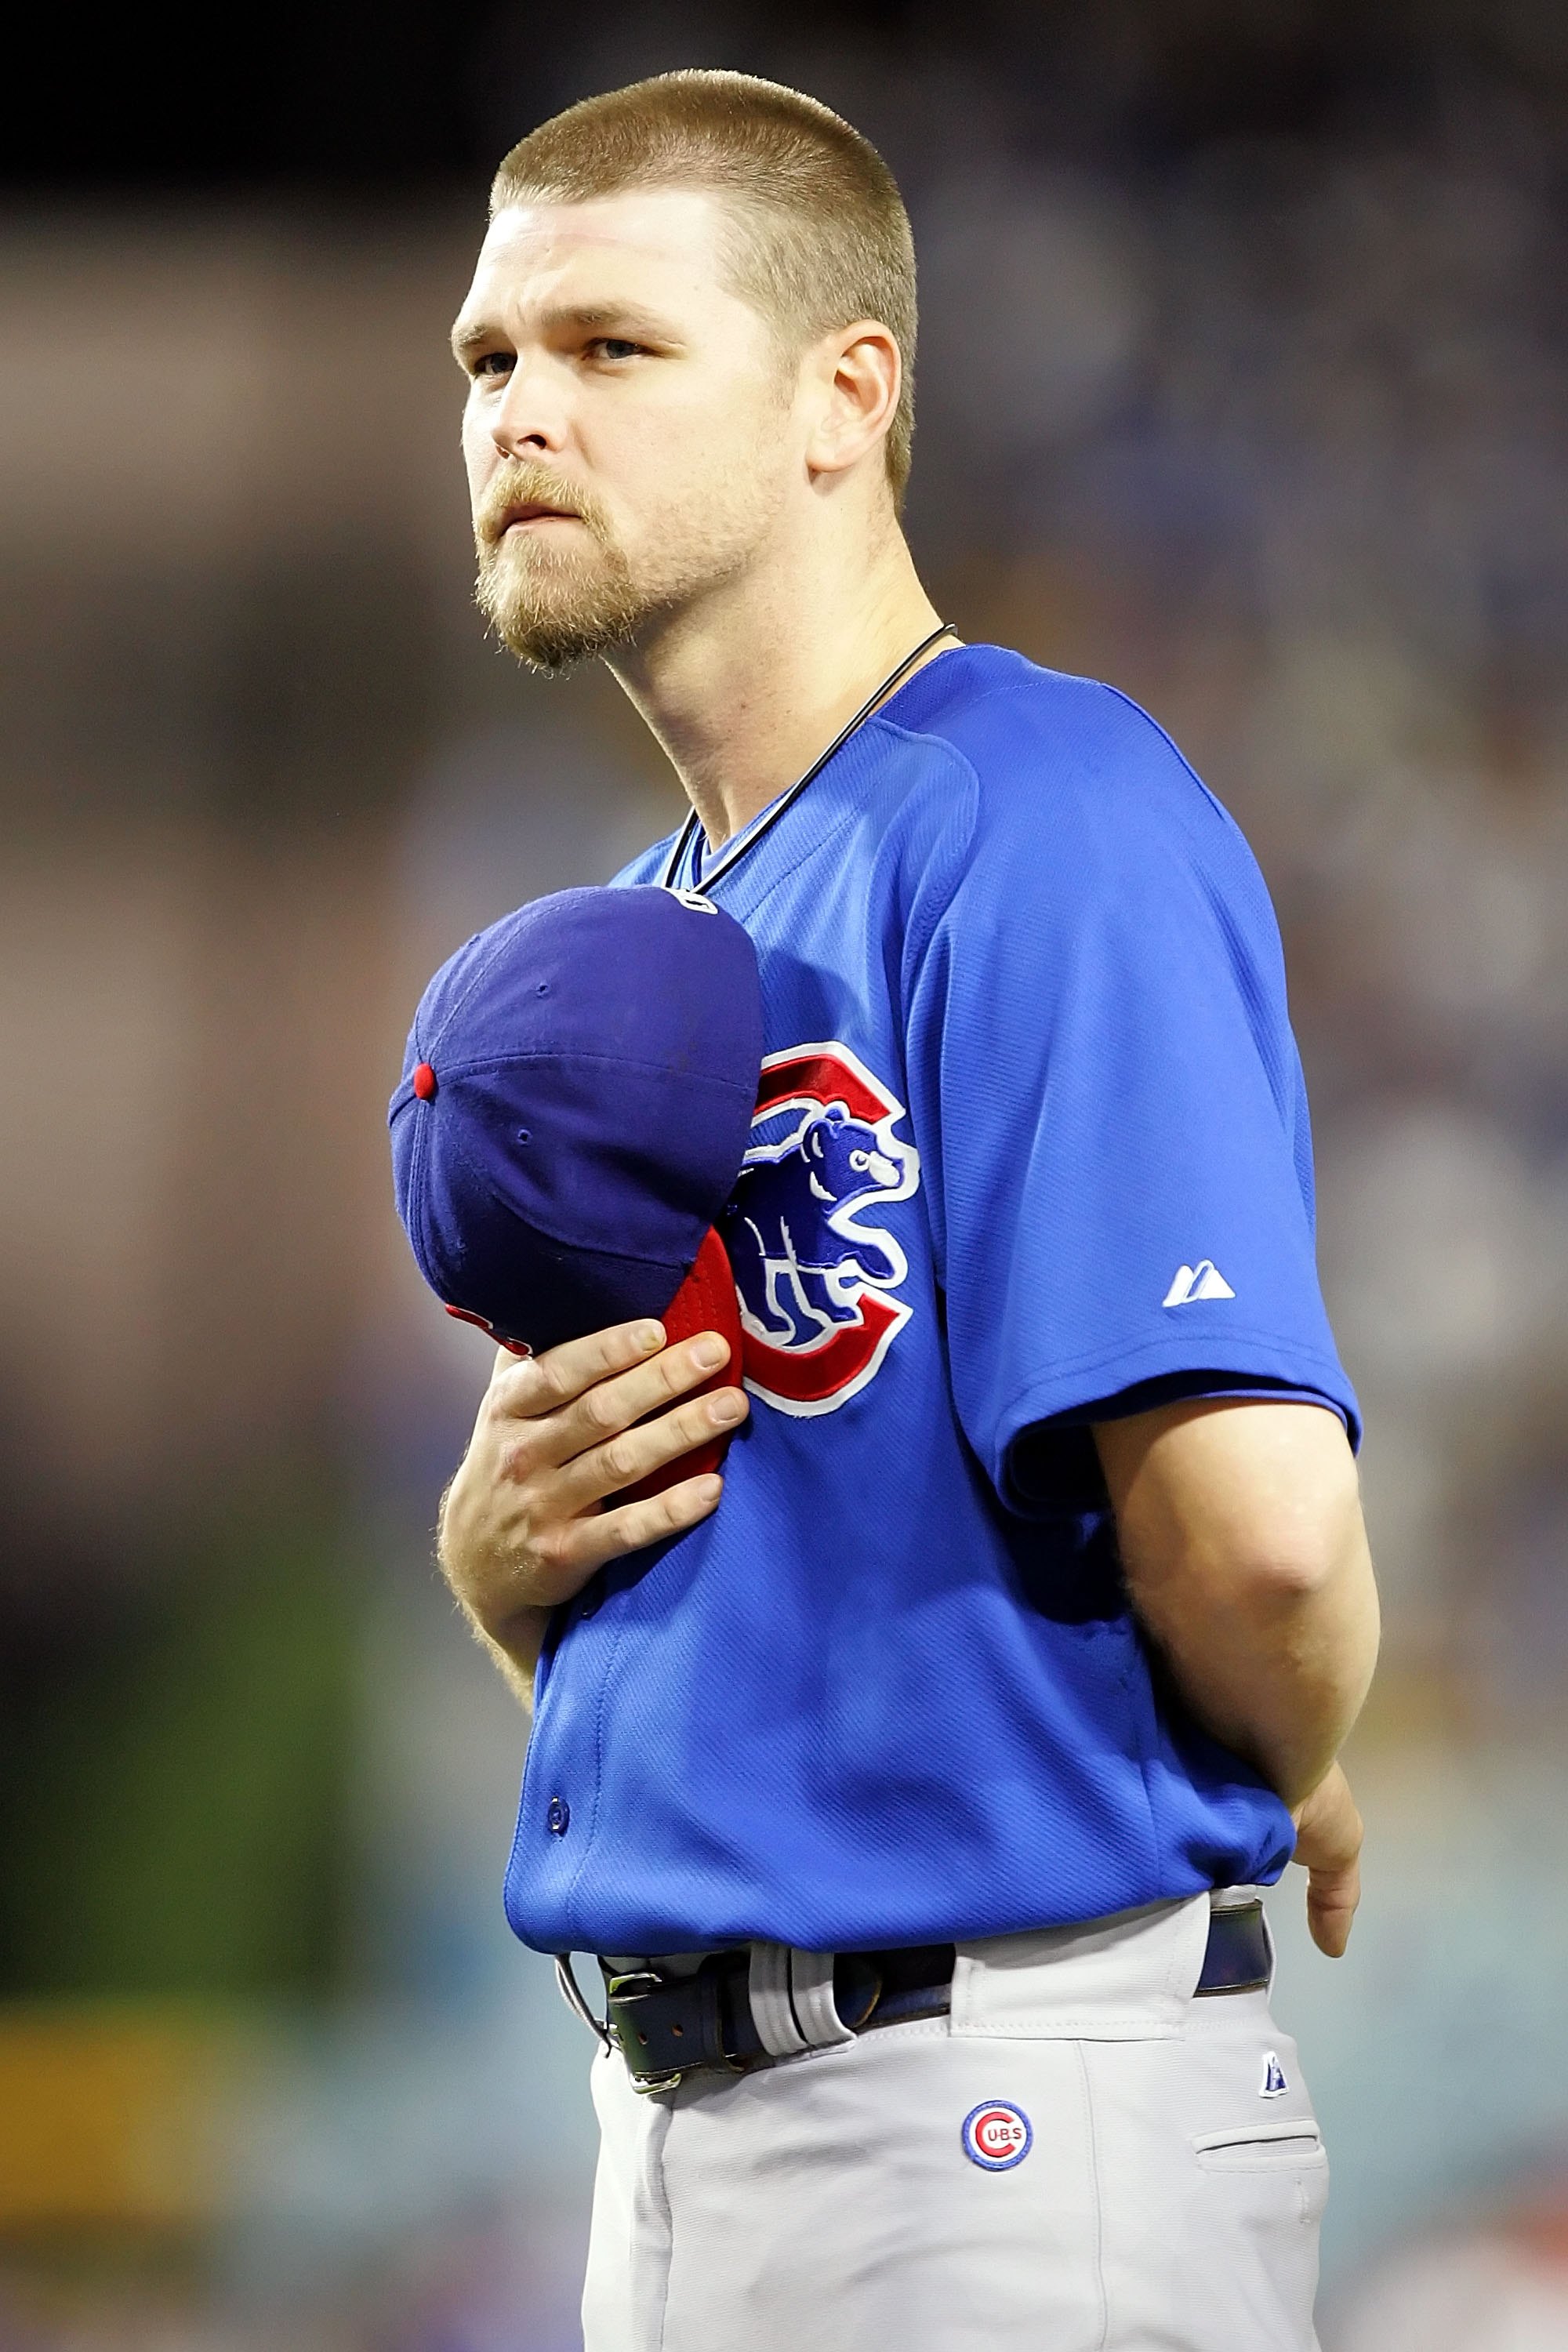 Kerry Wood Signs with the Cubs: 5 Reasons to Love This Deal